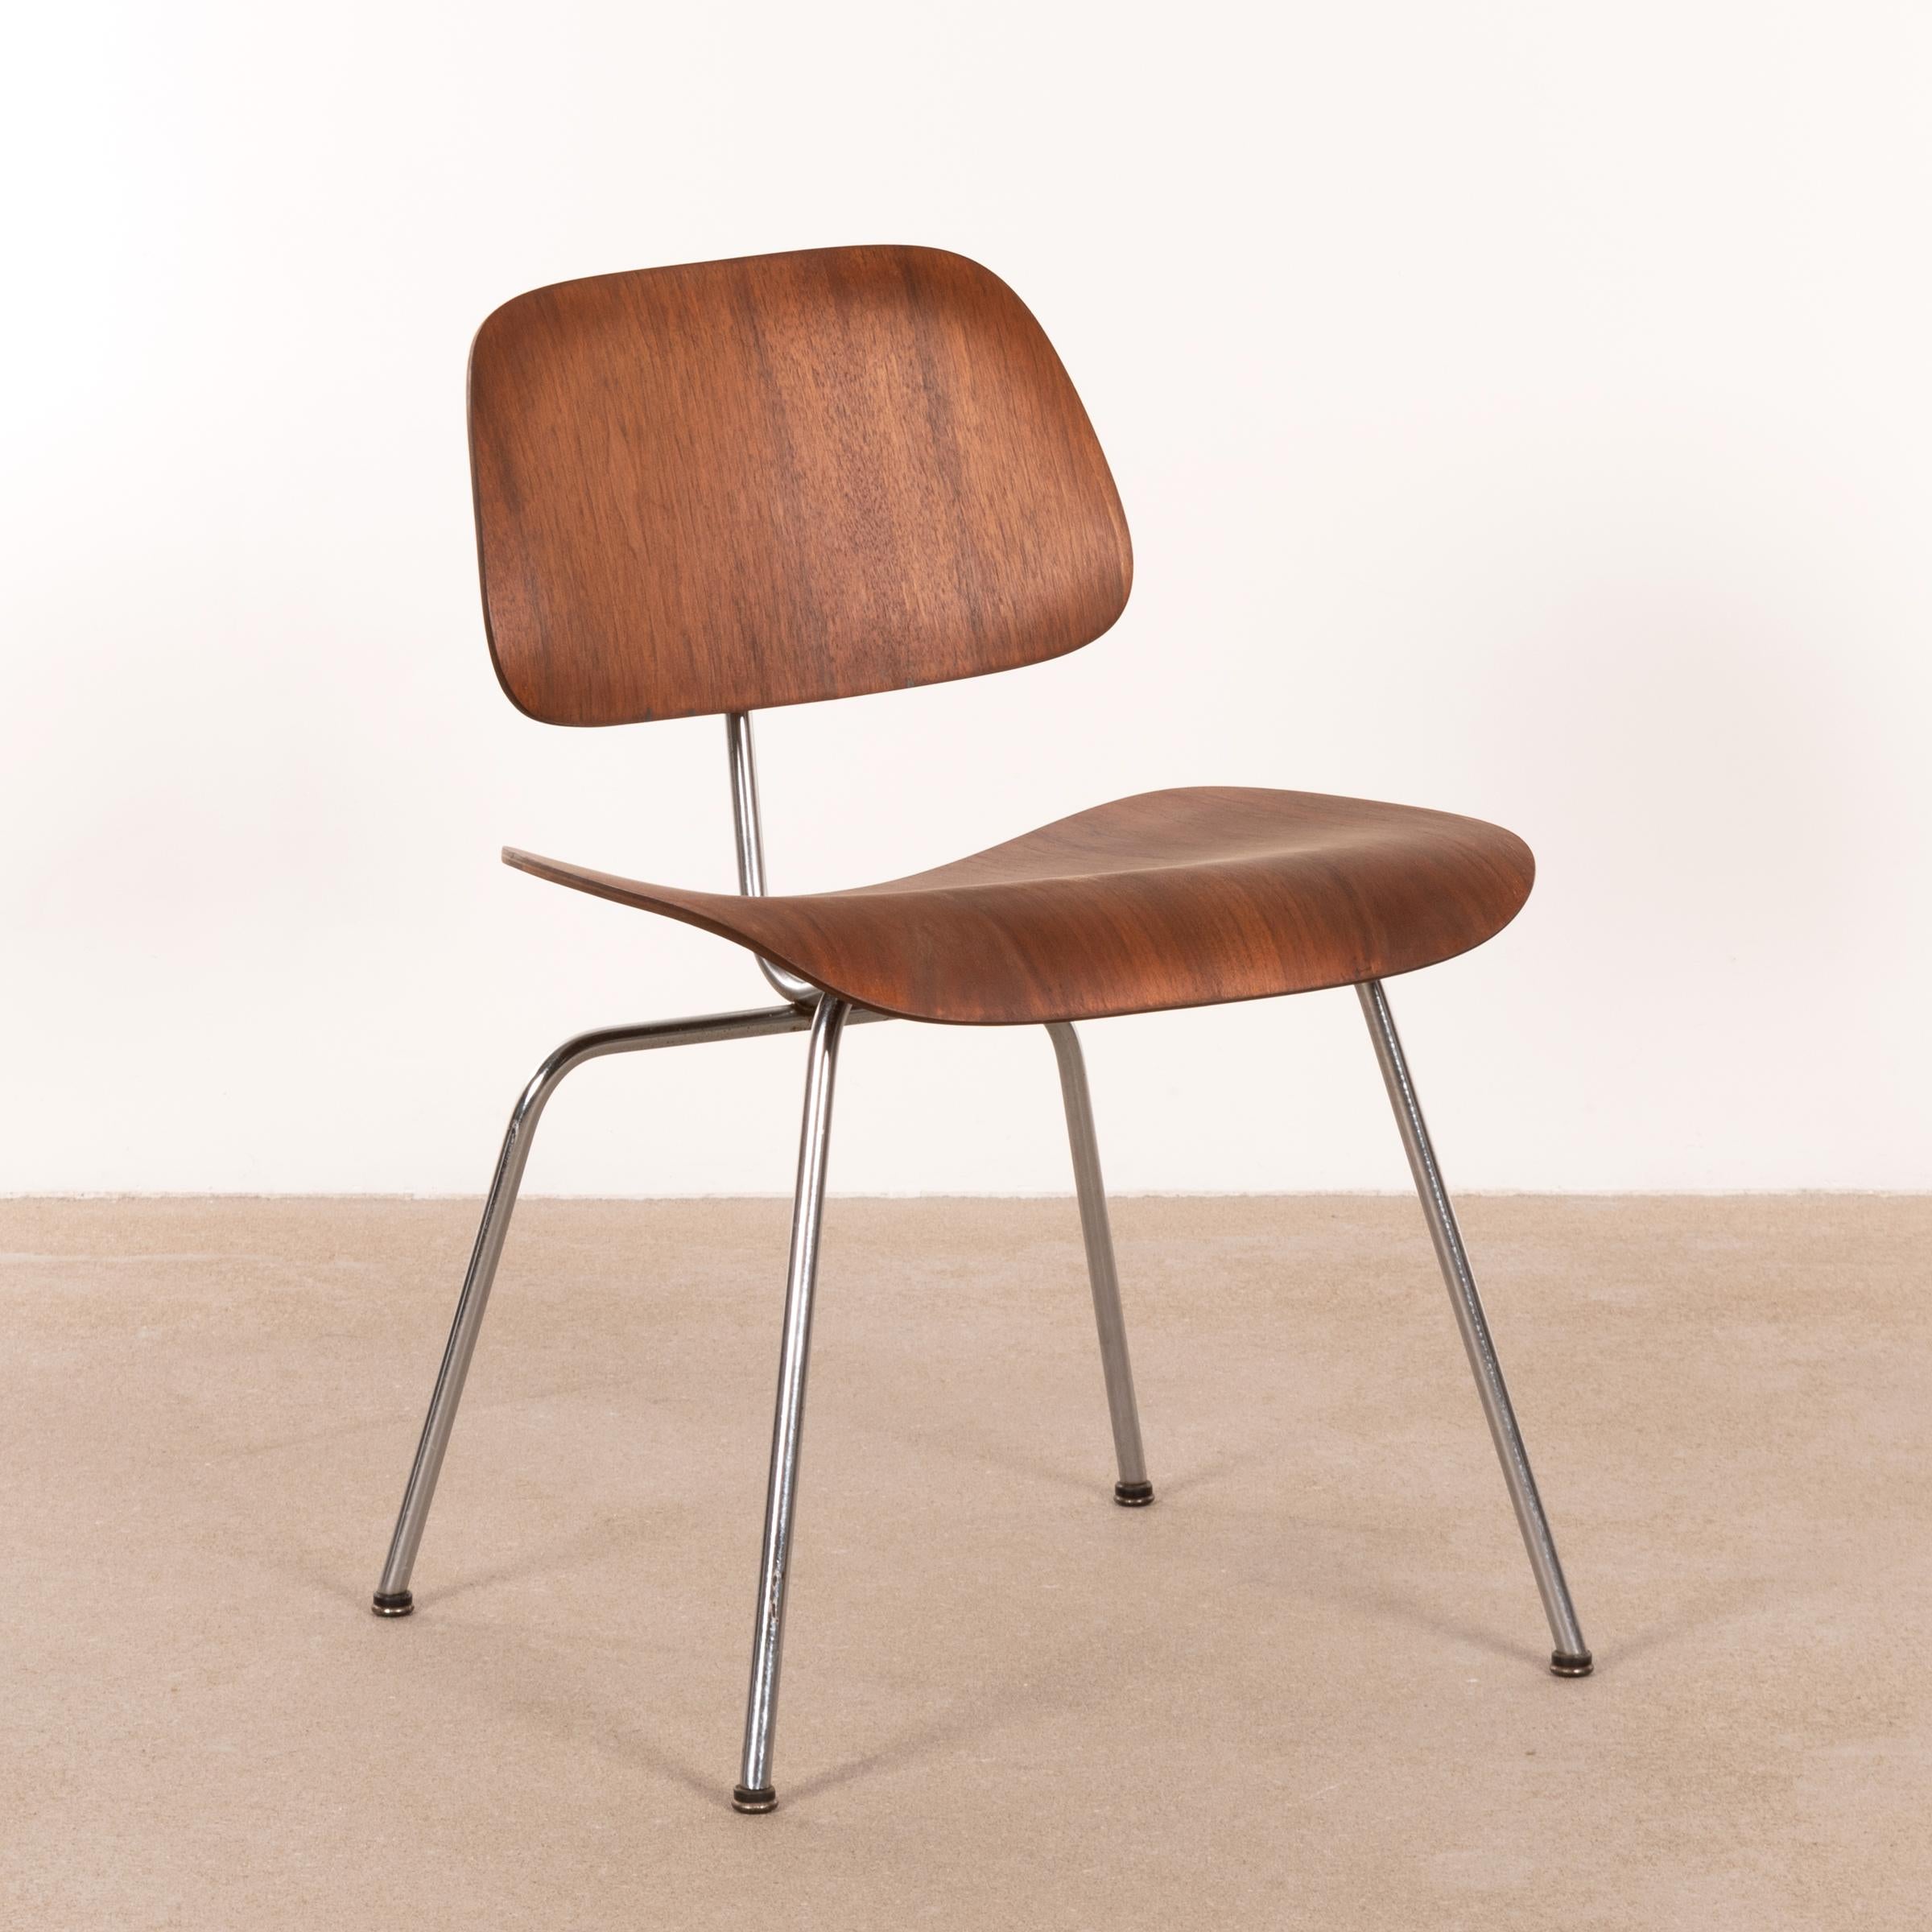 Mid-20th Century Charles & Ray Eames Early DCM Walnut Side Chair by Herman Miller, USA